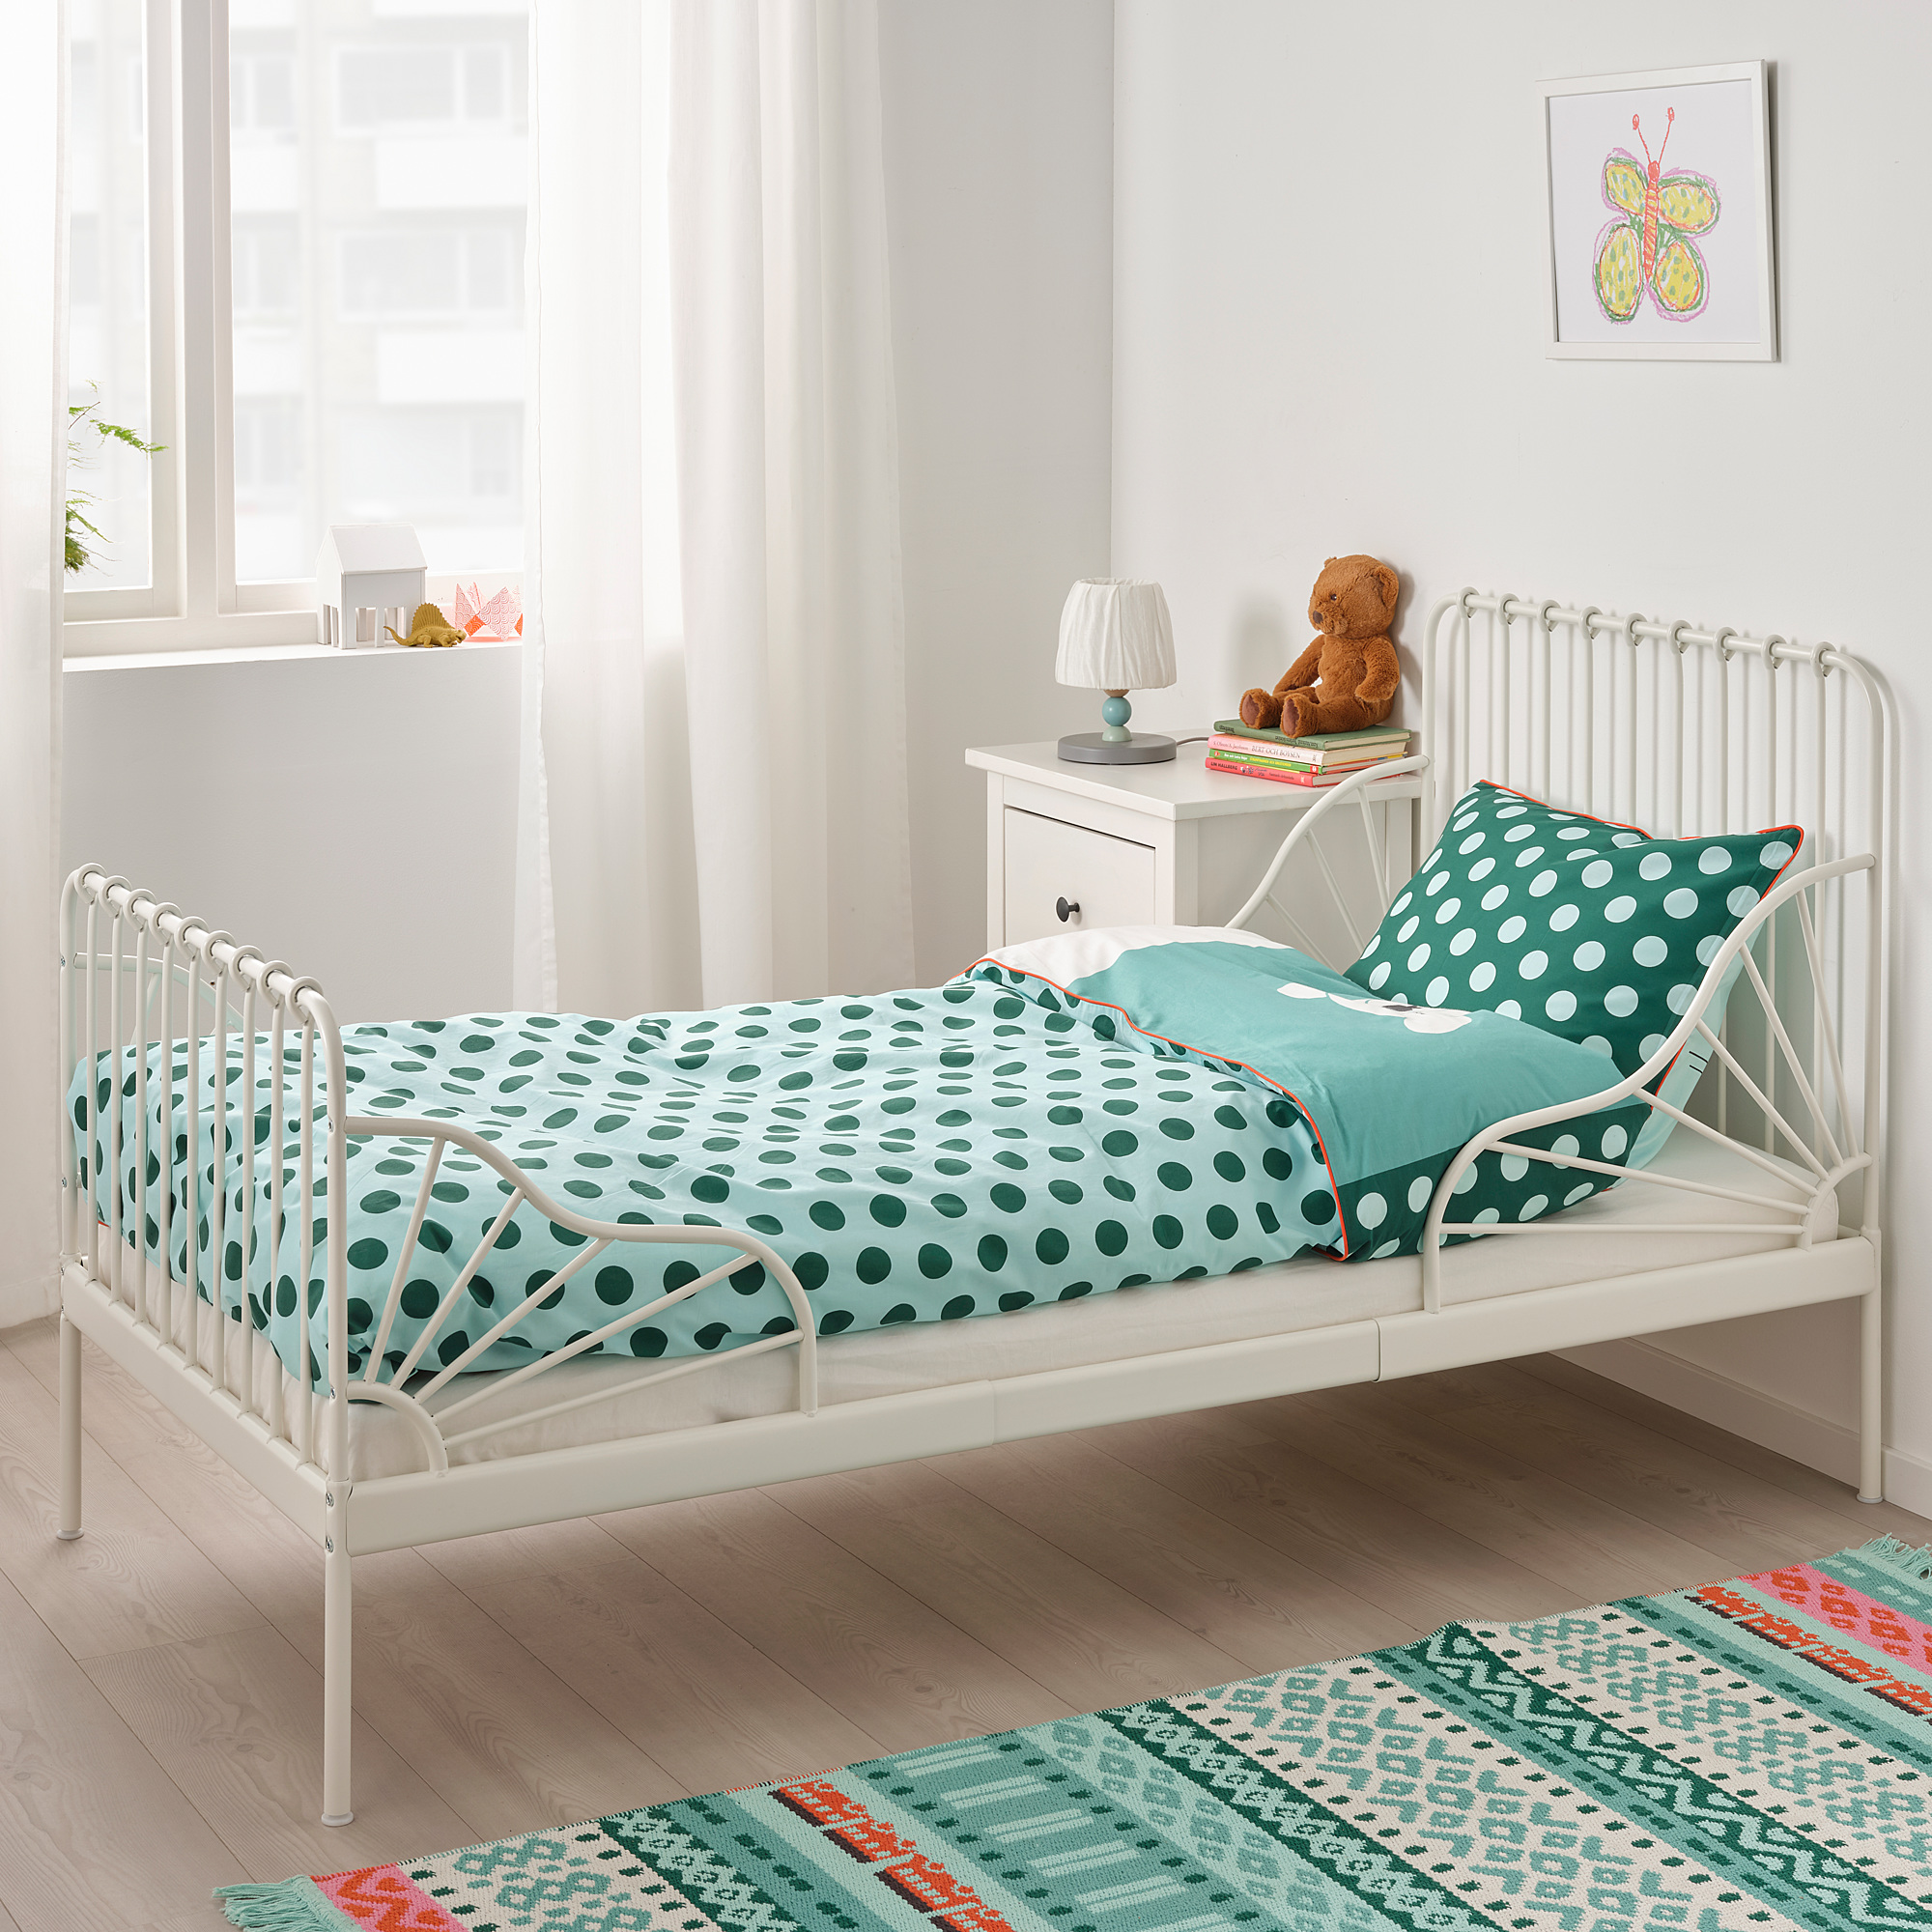 MINNEN ext bed frame with slatted bed base